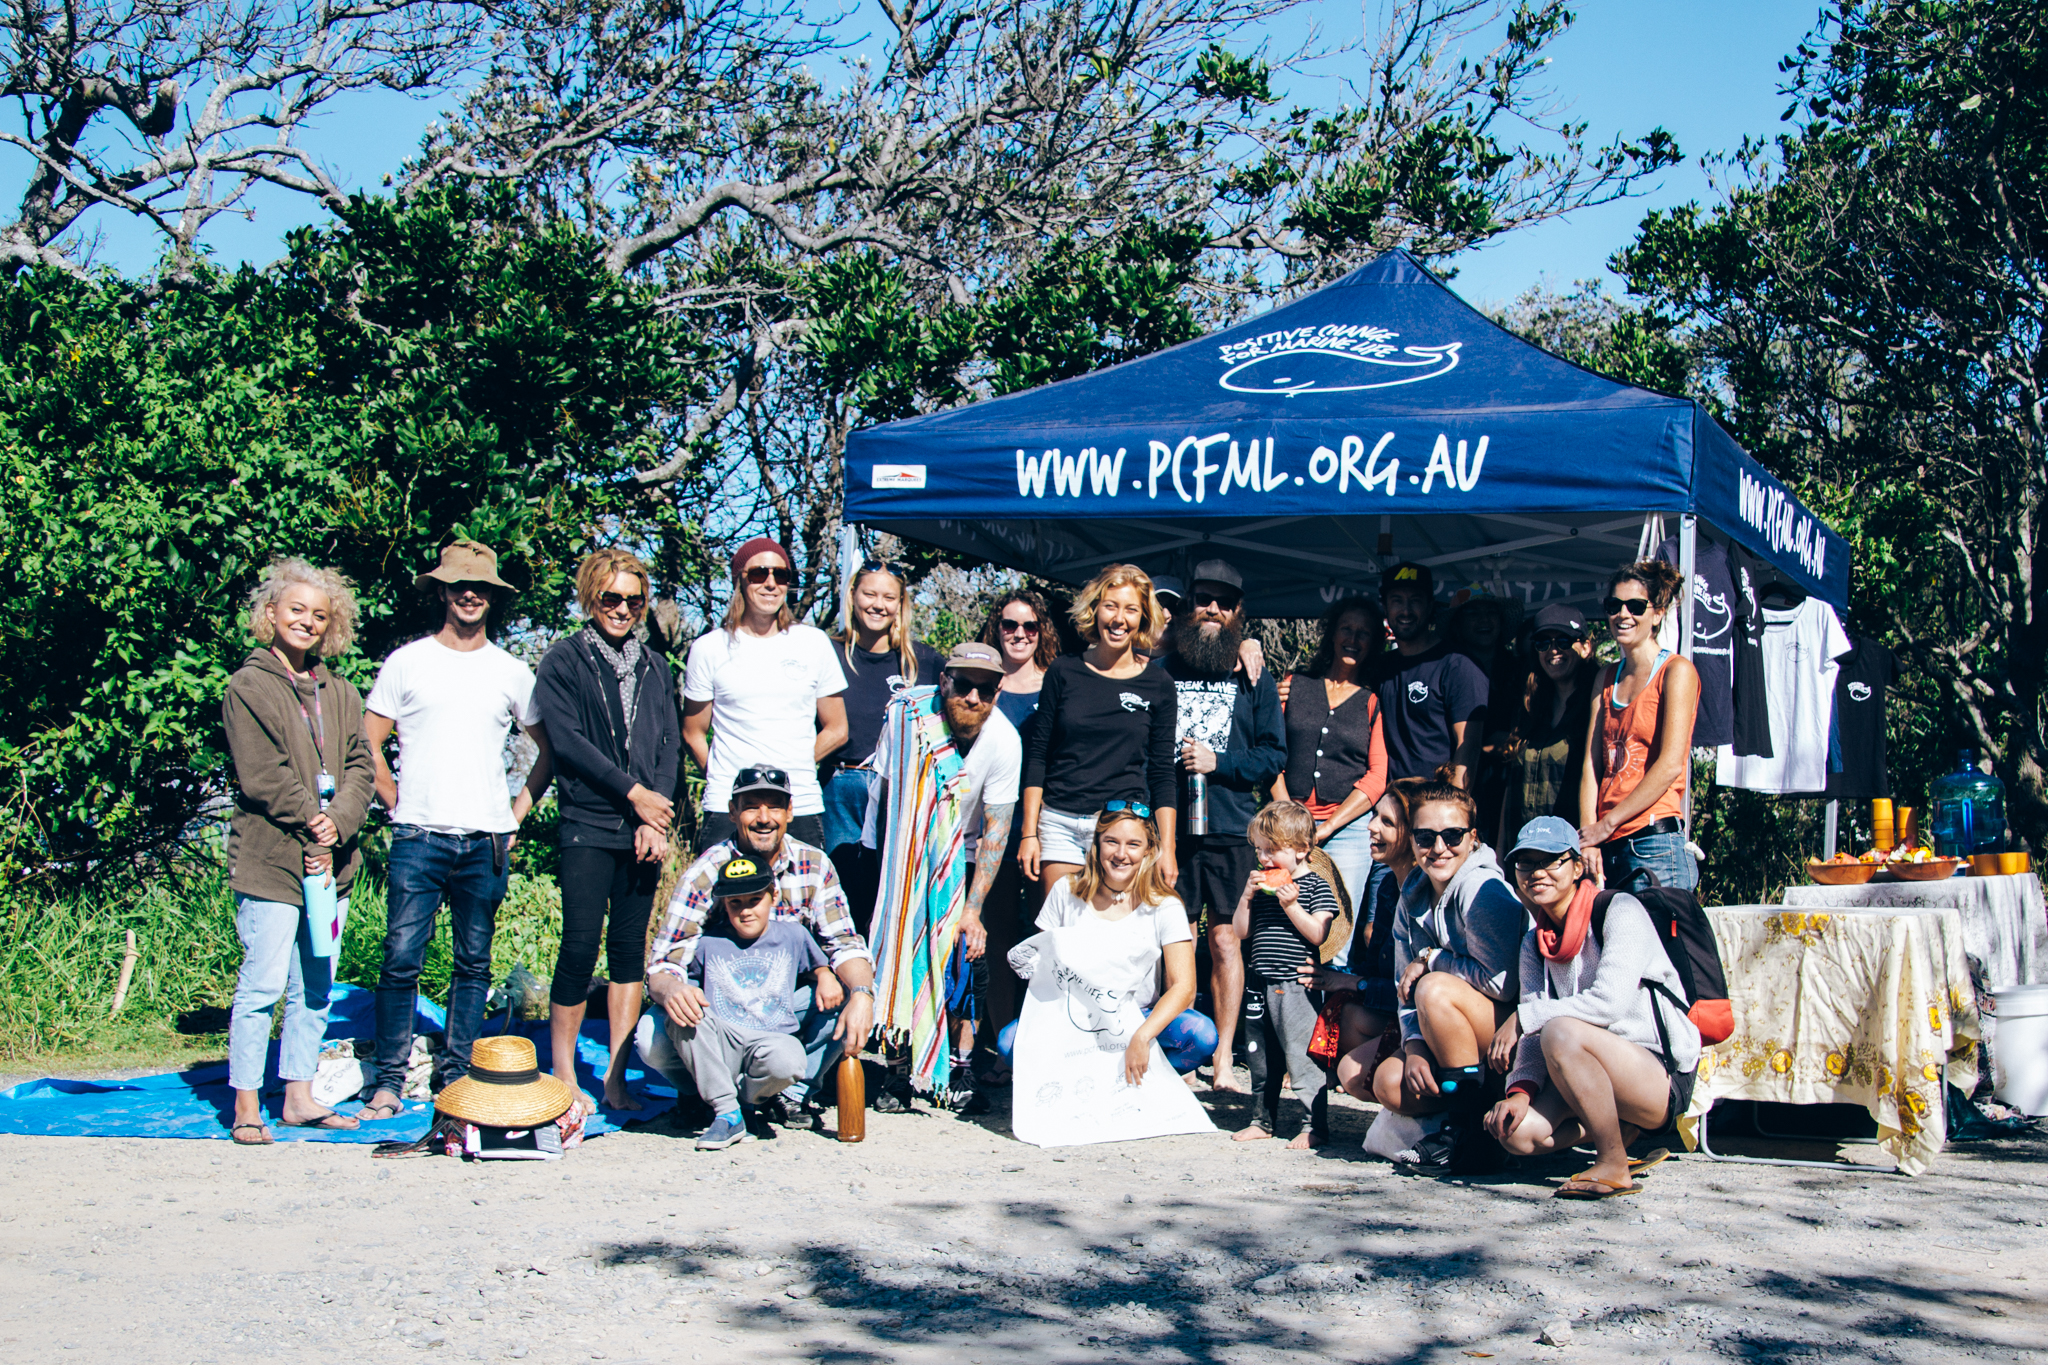 Splendour artists help green groups clean Byron beach, haul 12kg of waste, “one by one is how we do it”